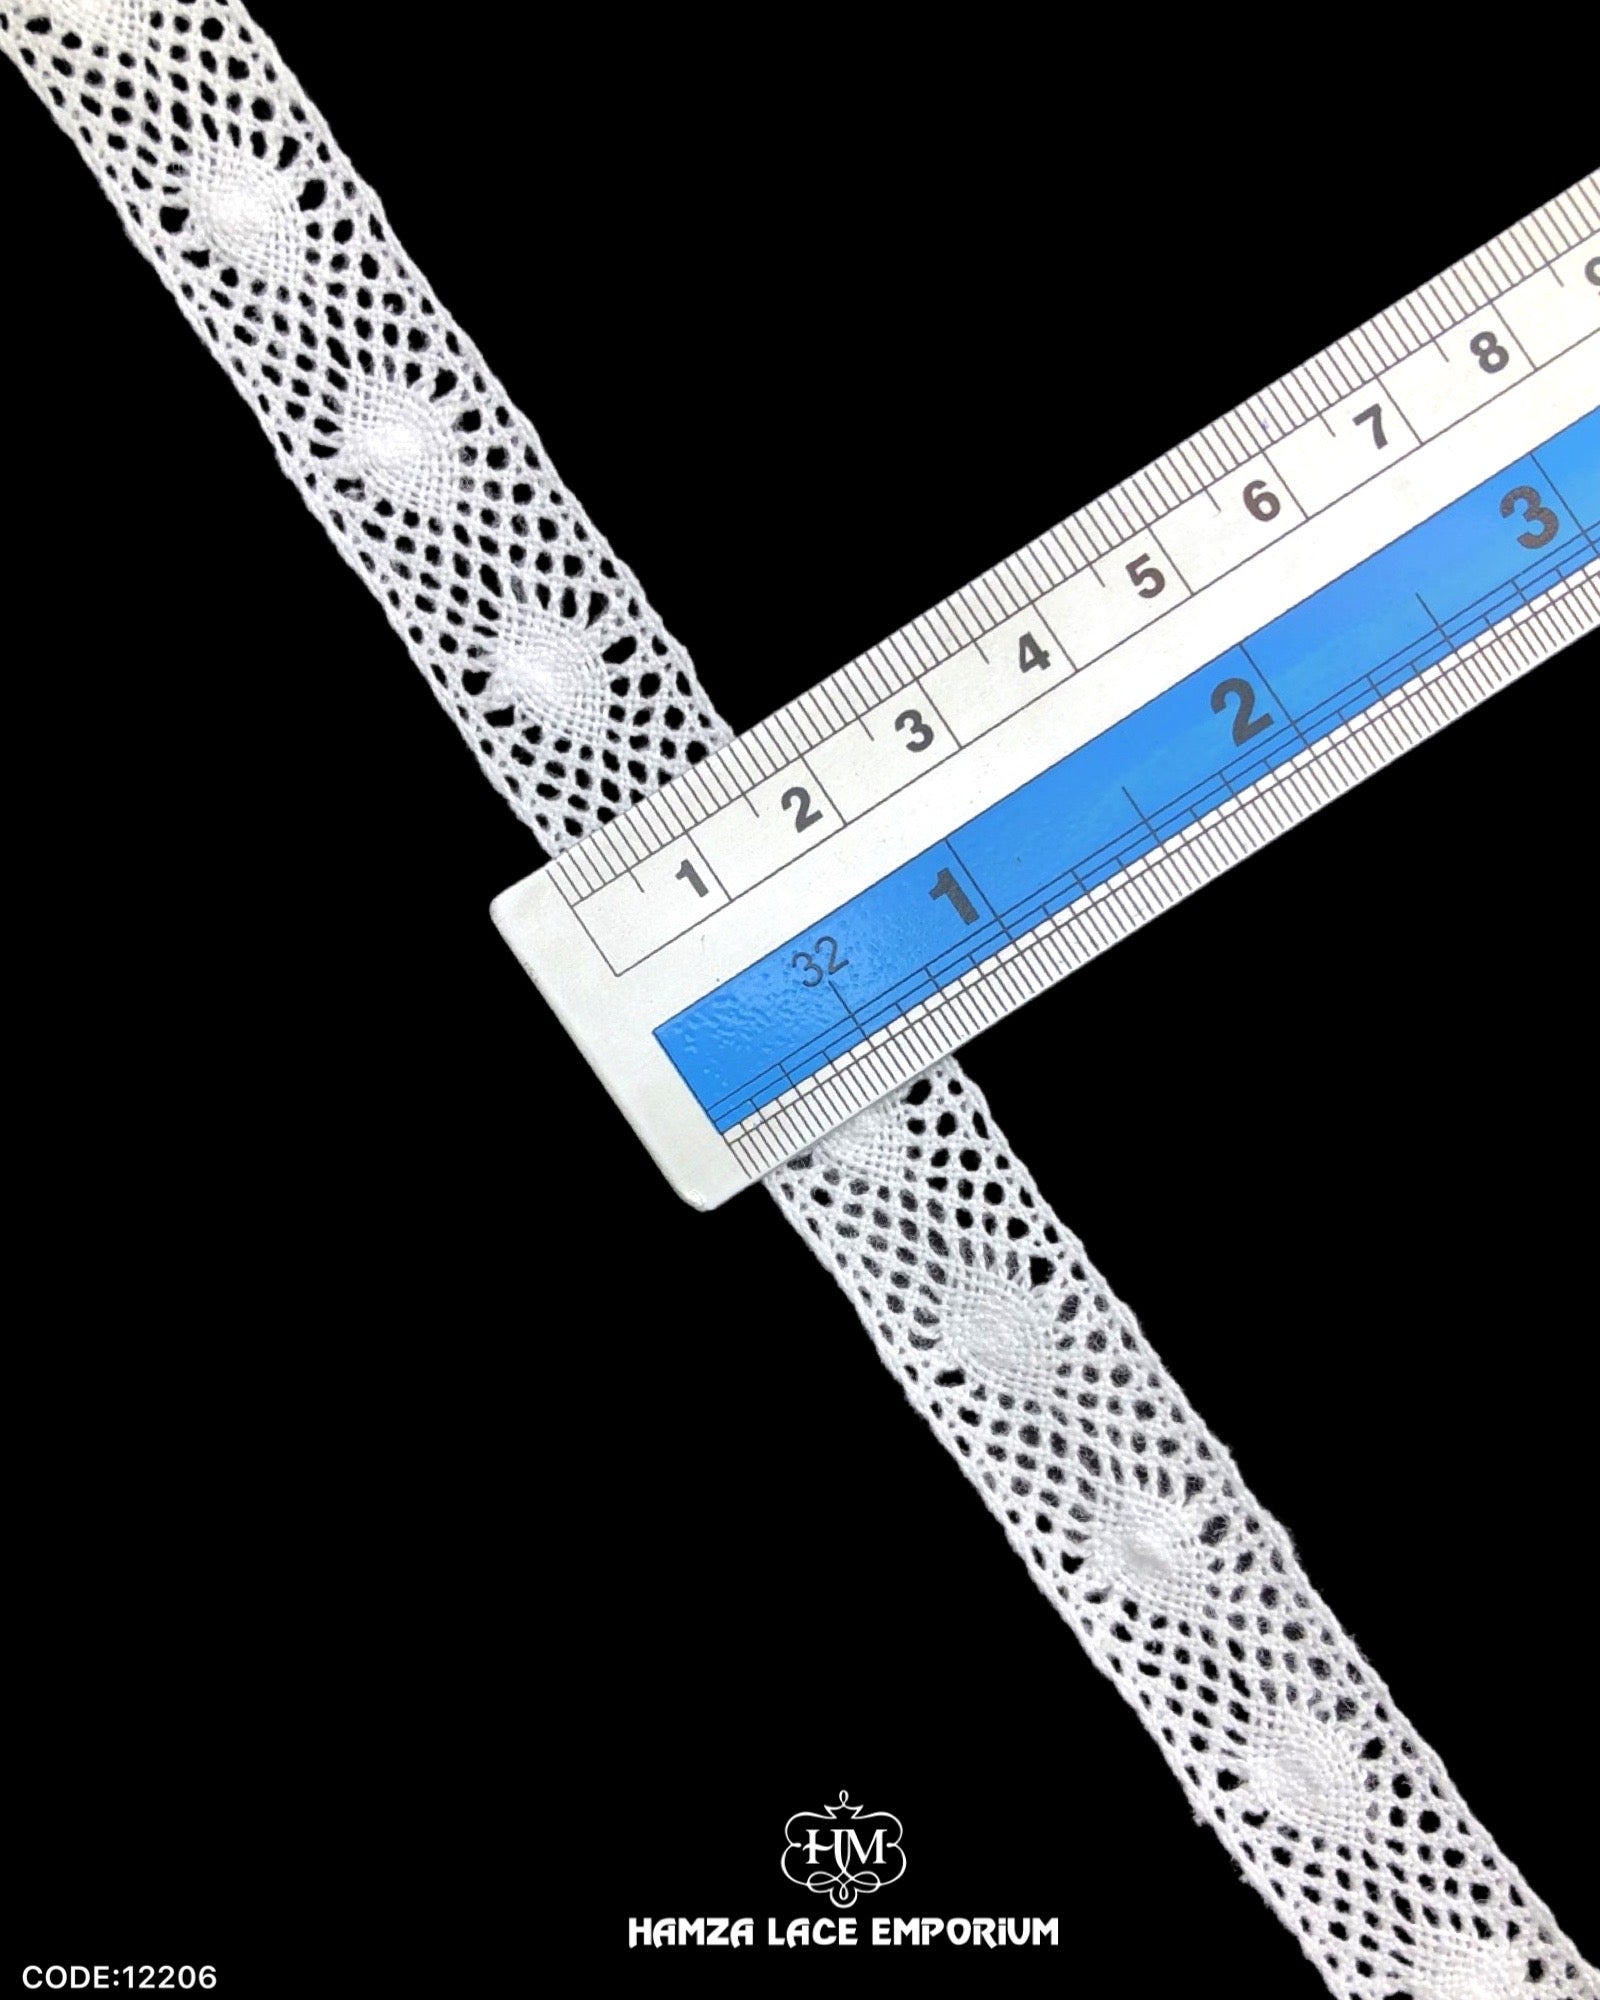 Size of the 'Center Filling Crochet Lace 12206' is shown with the help of a ruler as '0.5' inches